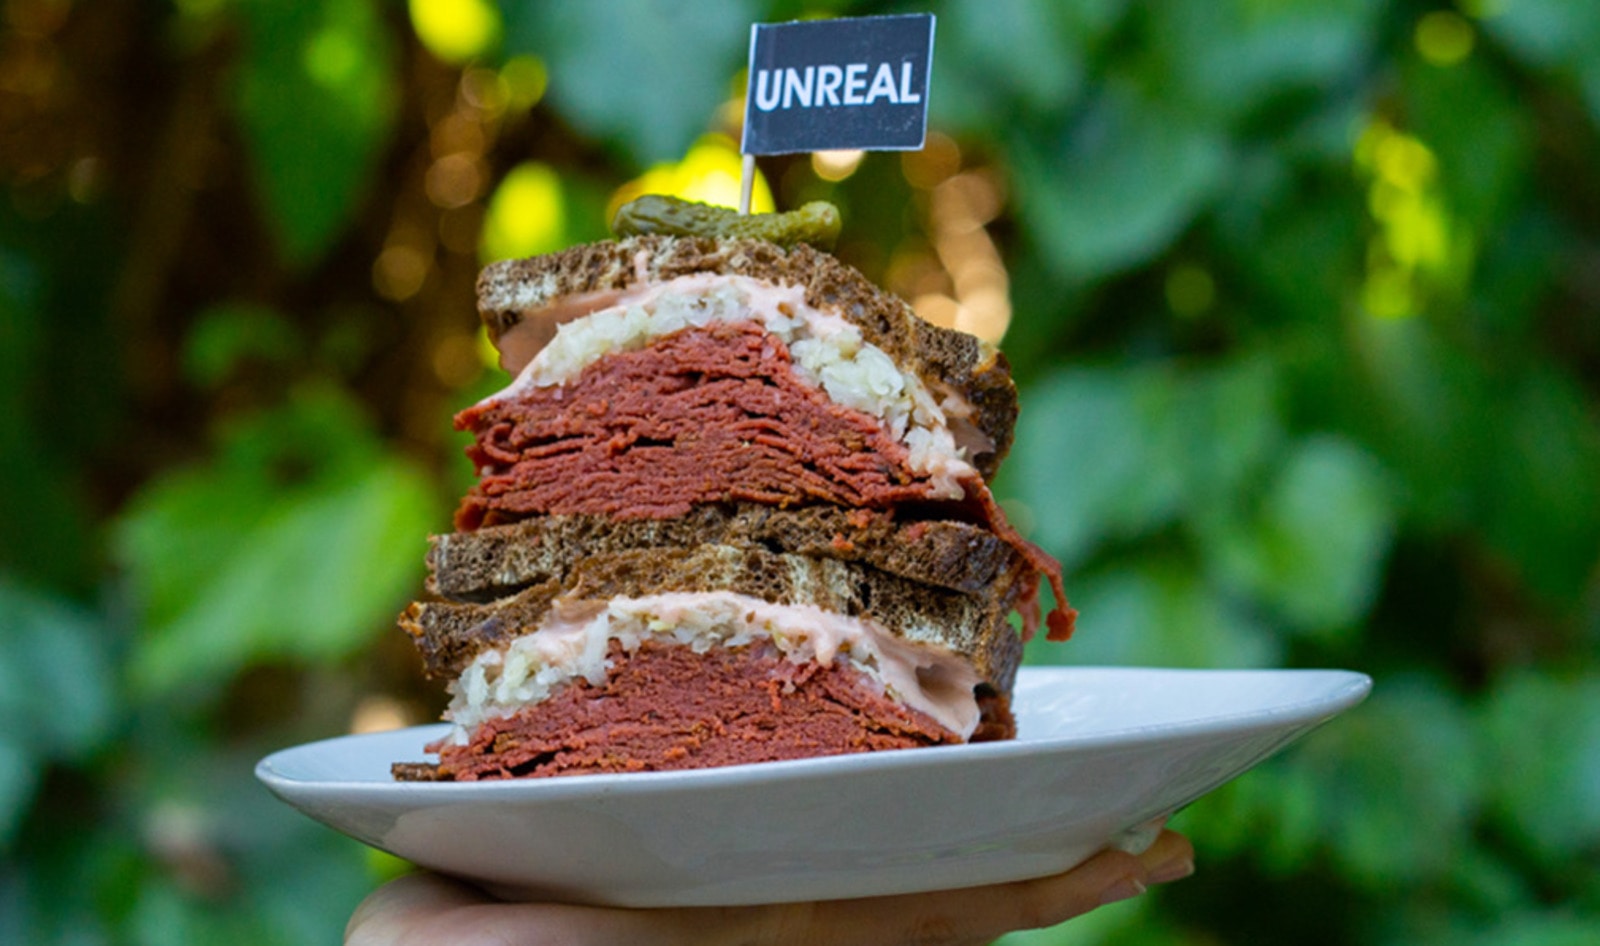 Vegan Corned Beef Sandwich Debuts at 58 Whole Foods Markets